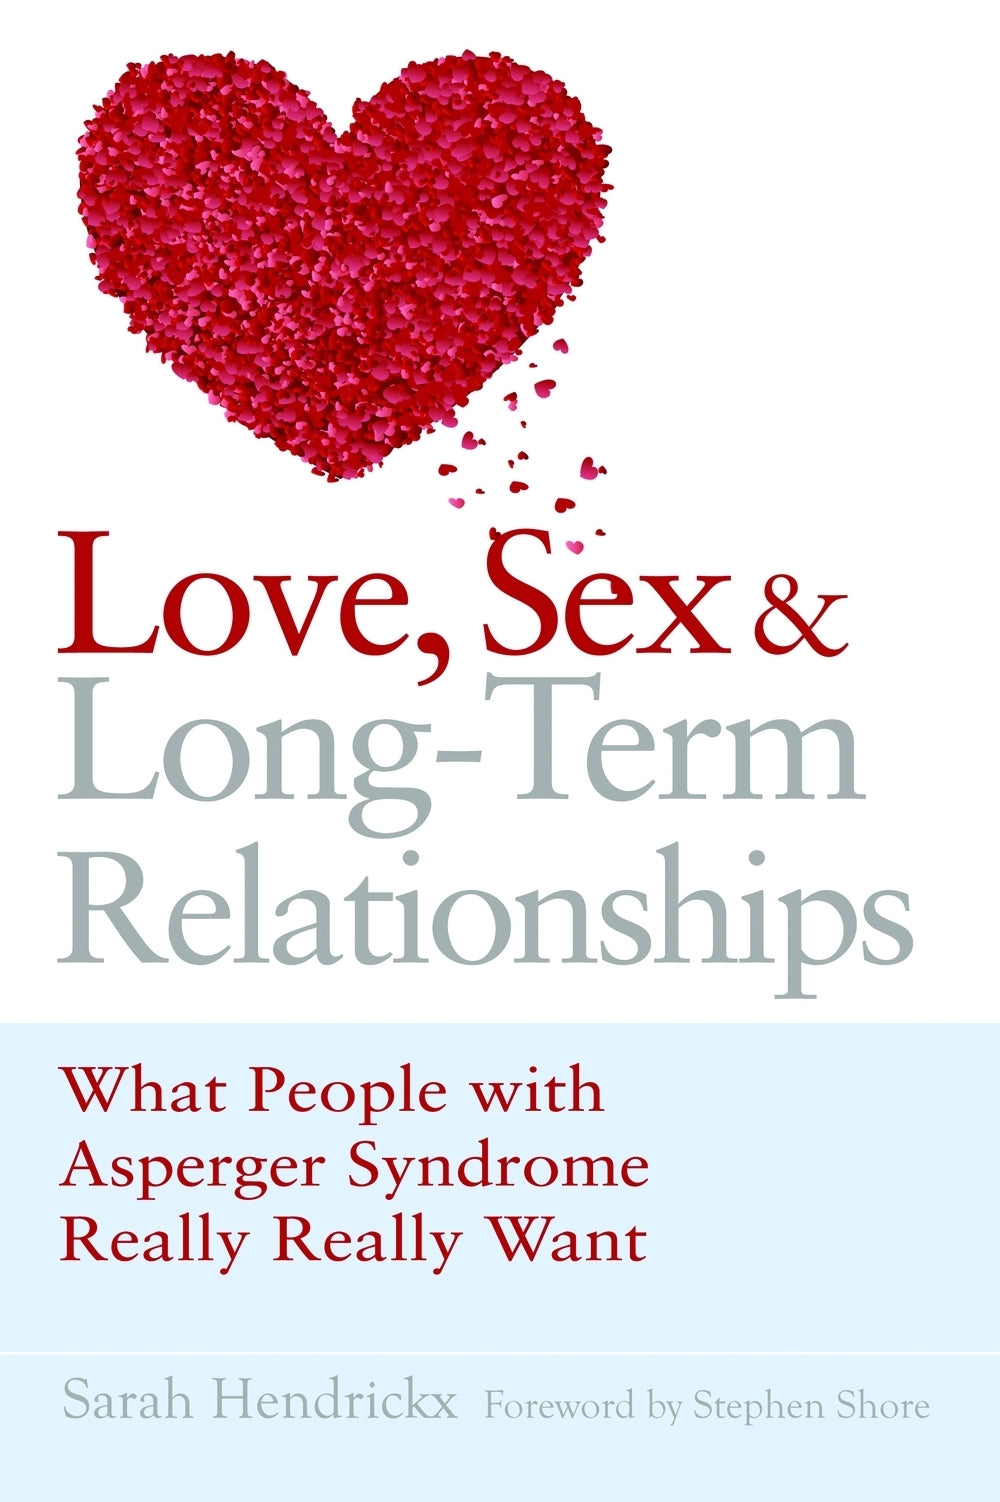 Love, Sex and Long-Term Relationships by Stephen Shore, Sarah Hendrickx